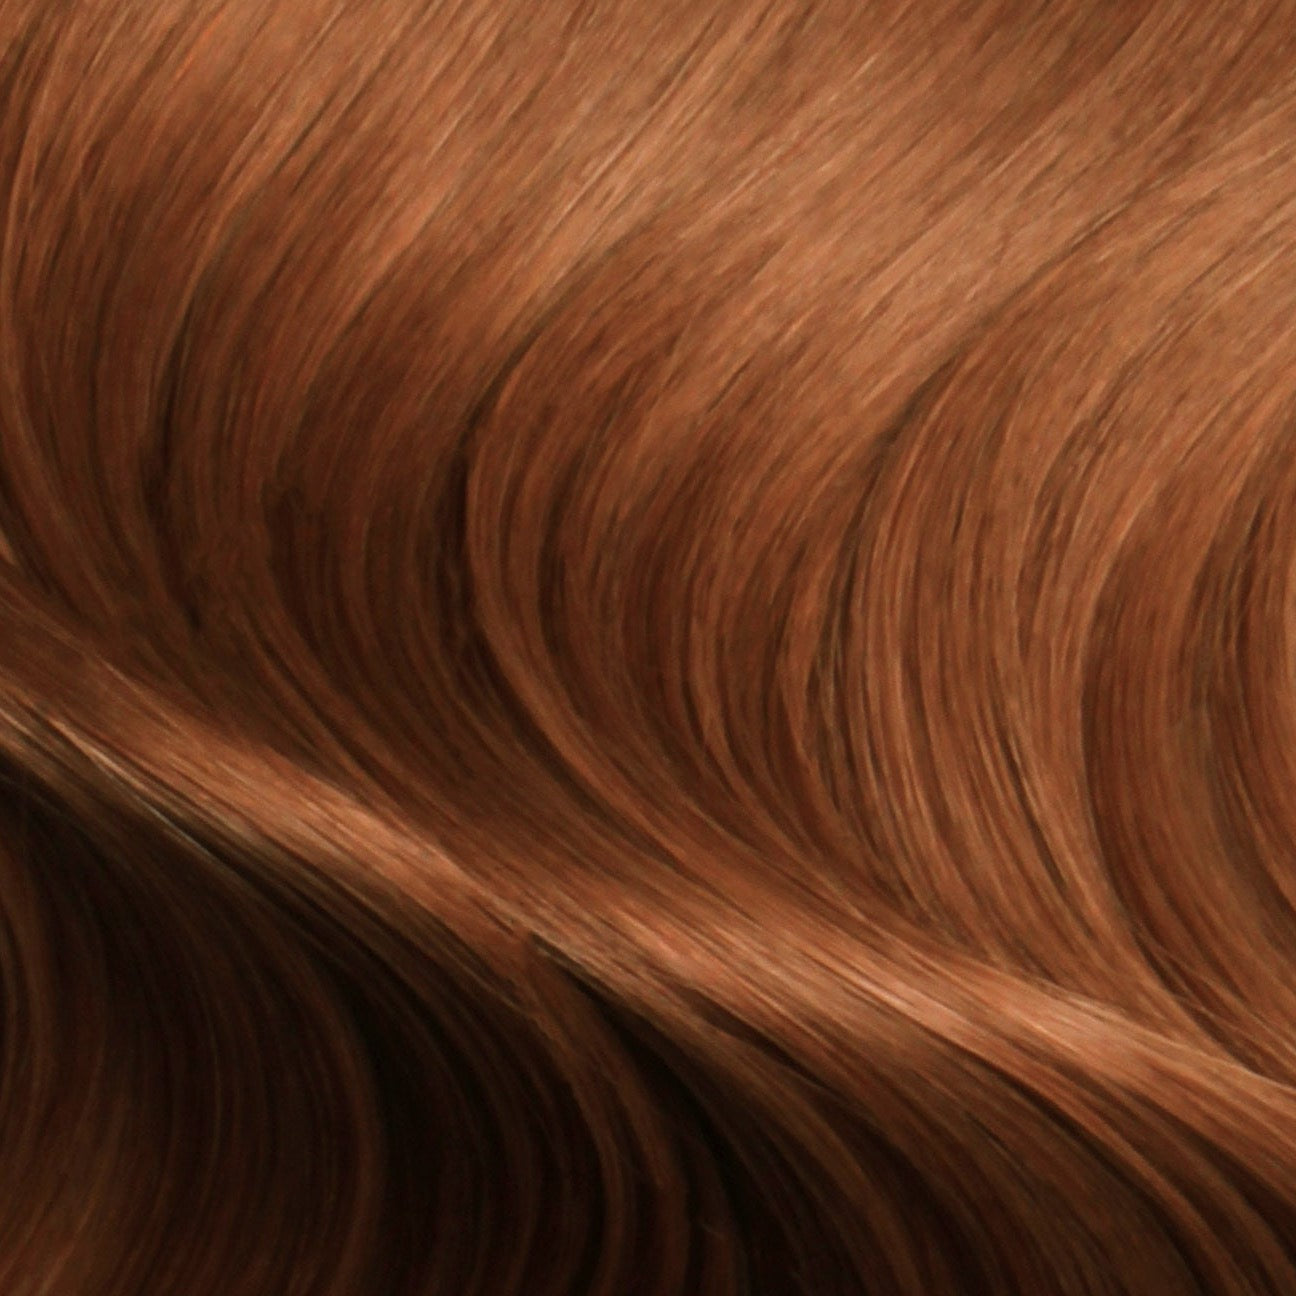 Nano Bonds 20 Inches - SWAY Hair Extensions Auburn-30 Ultra-fine, invisible bonds for a flawless, natural look. 100% Remy Human hair, lightweight and versatile. Reusable and perfect for individual or salon use.